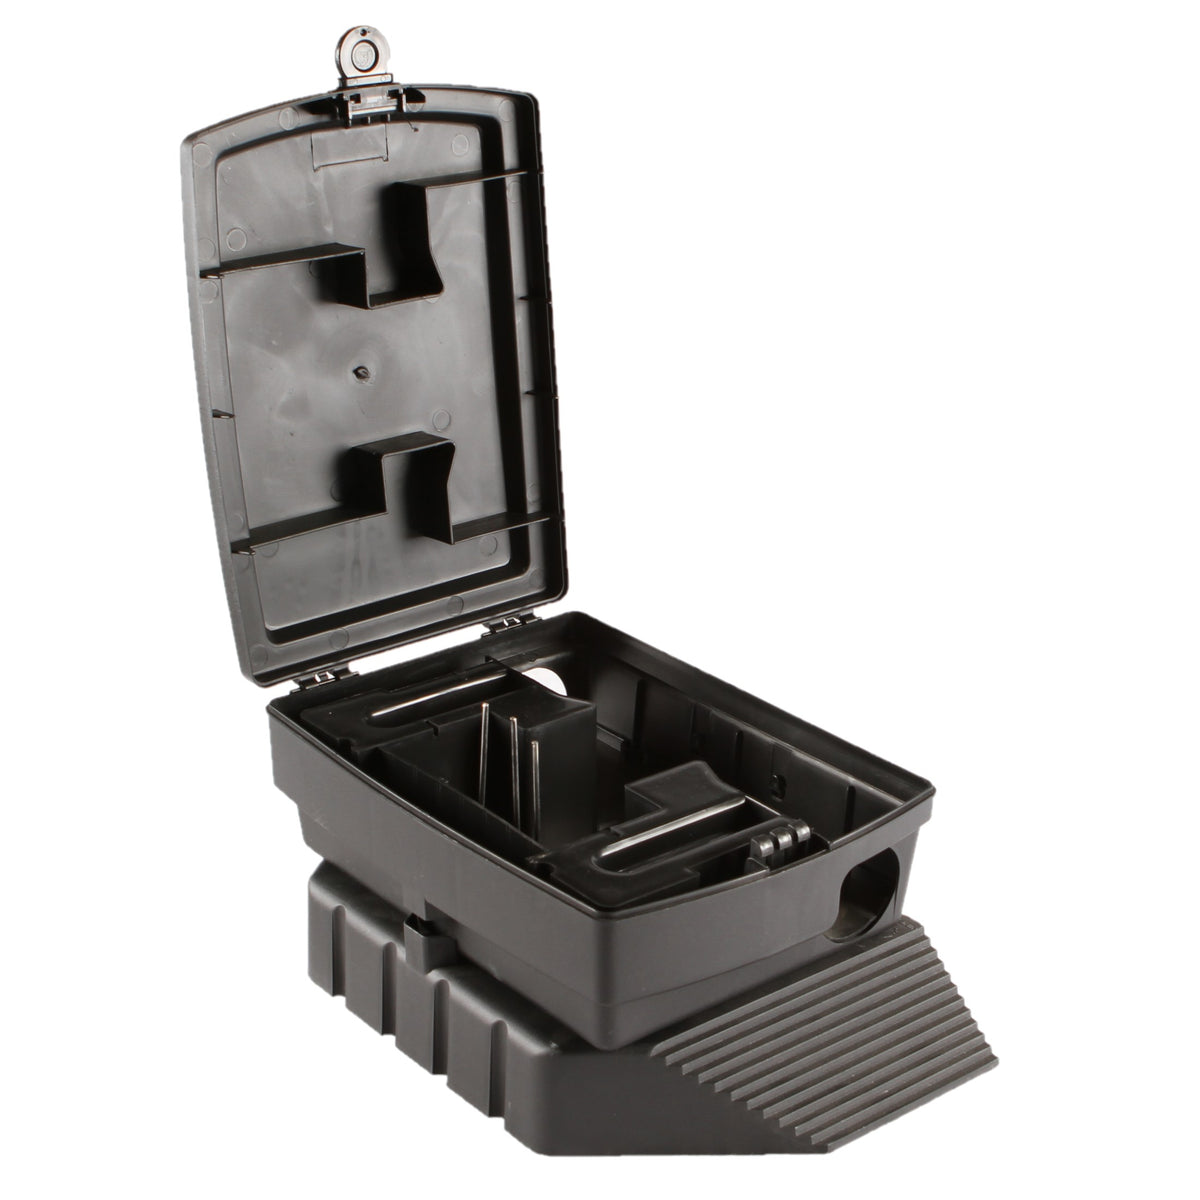 C.H.S Exterior Weighted Outdoor Bait Station - Clean Home Supplies